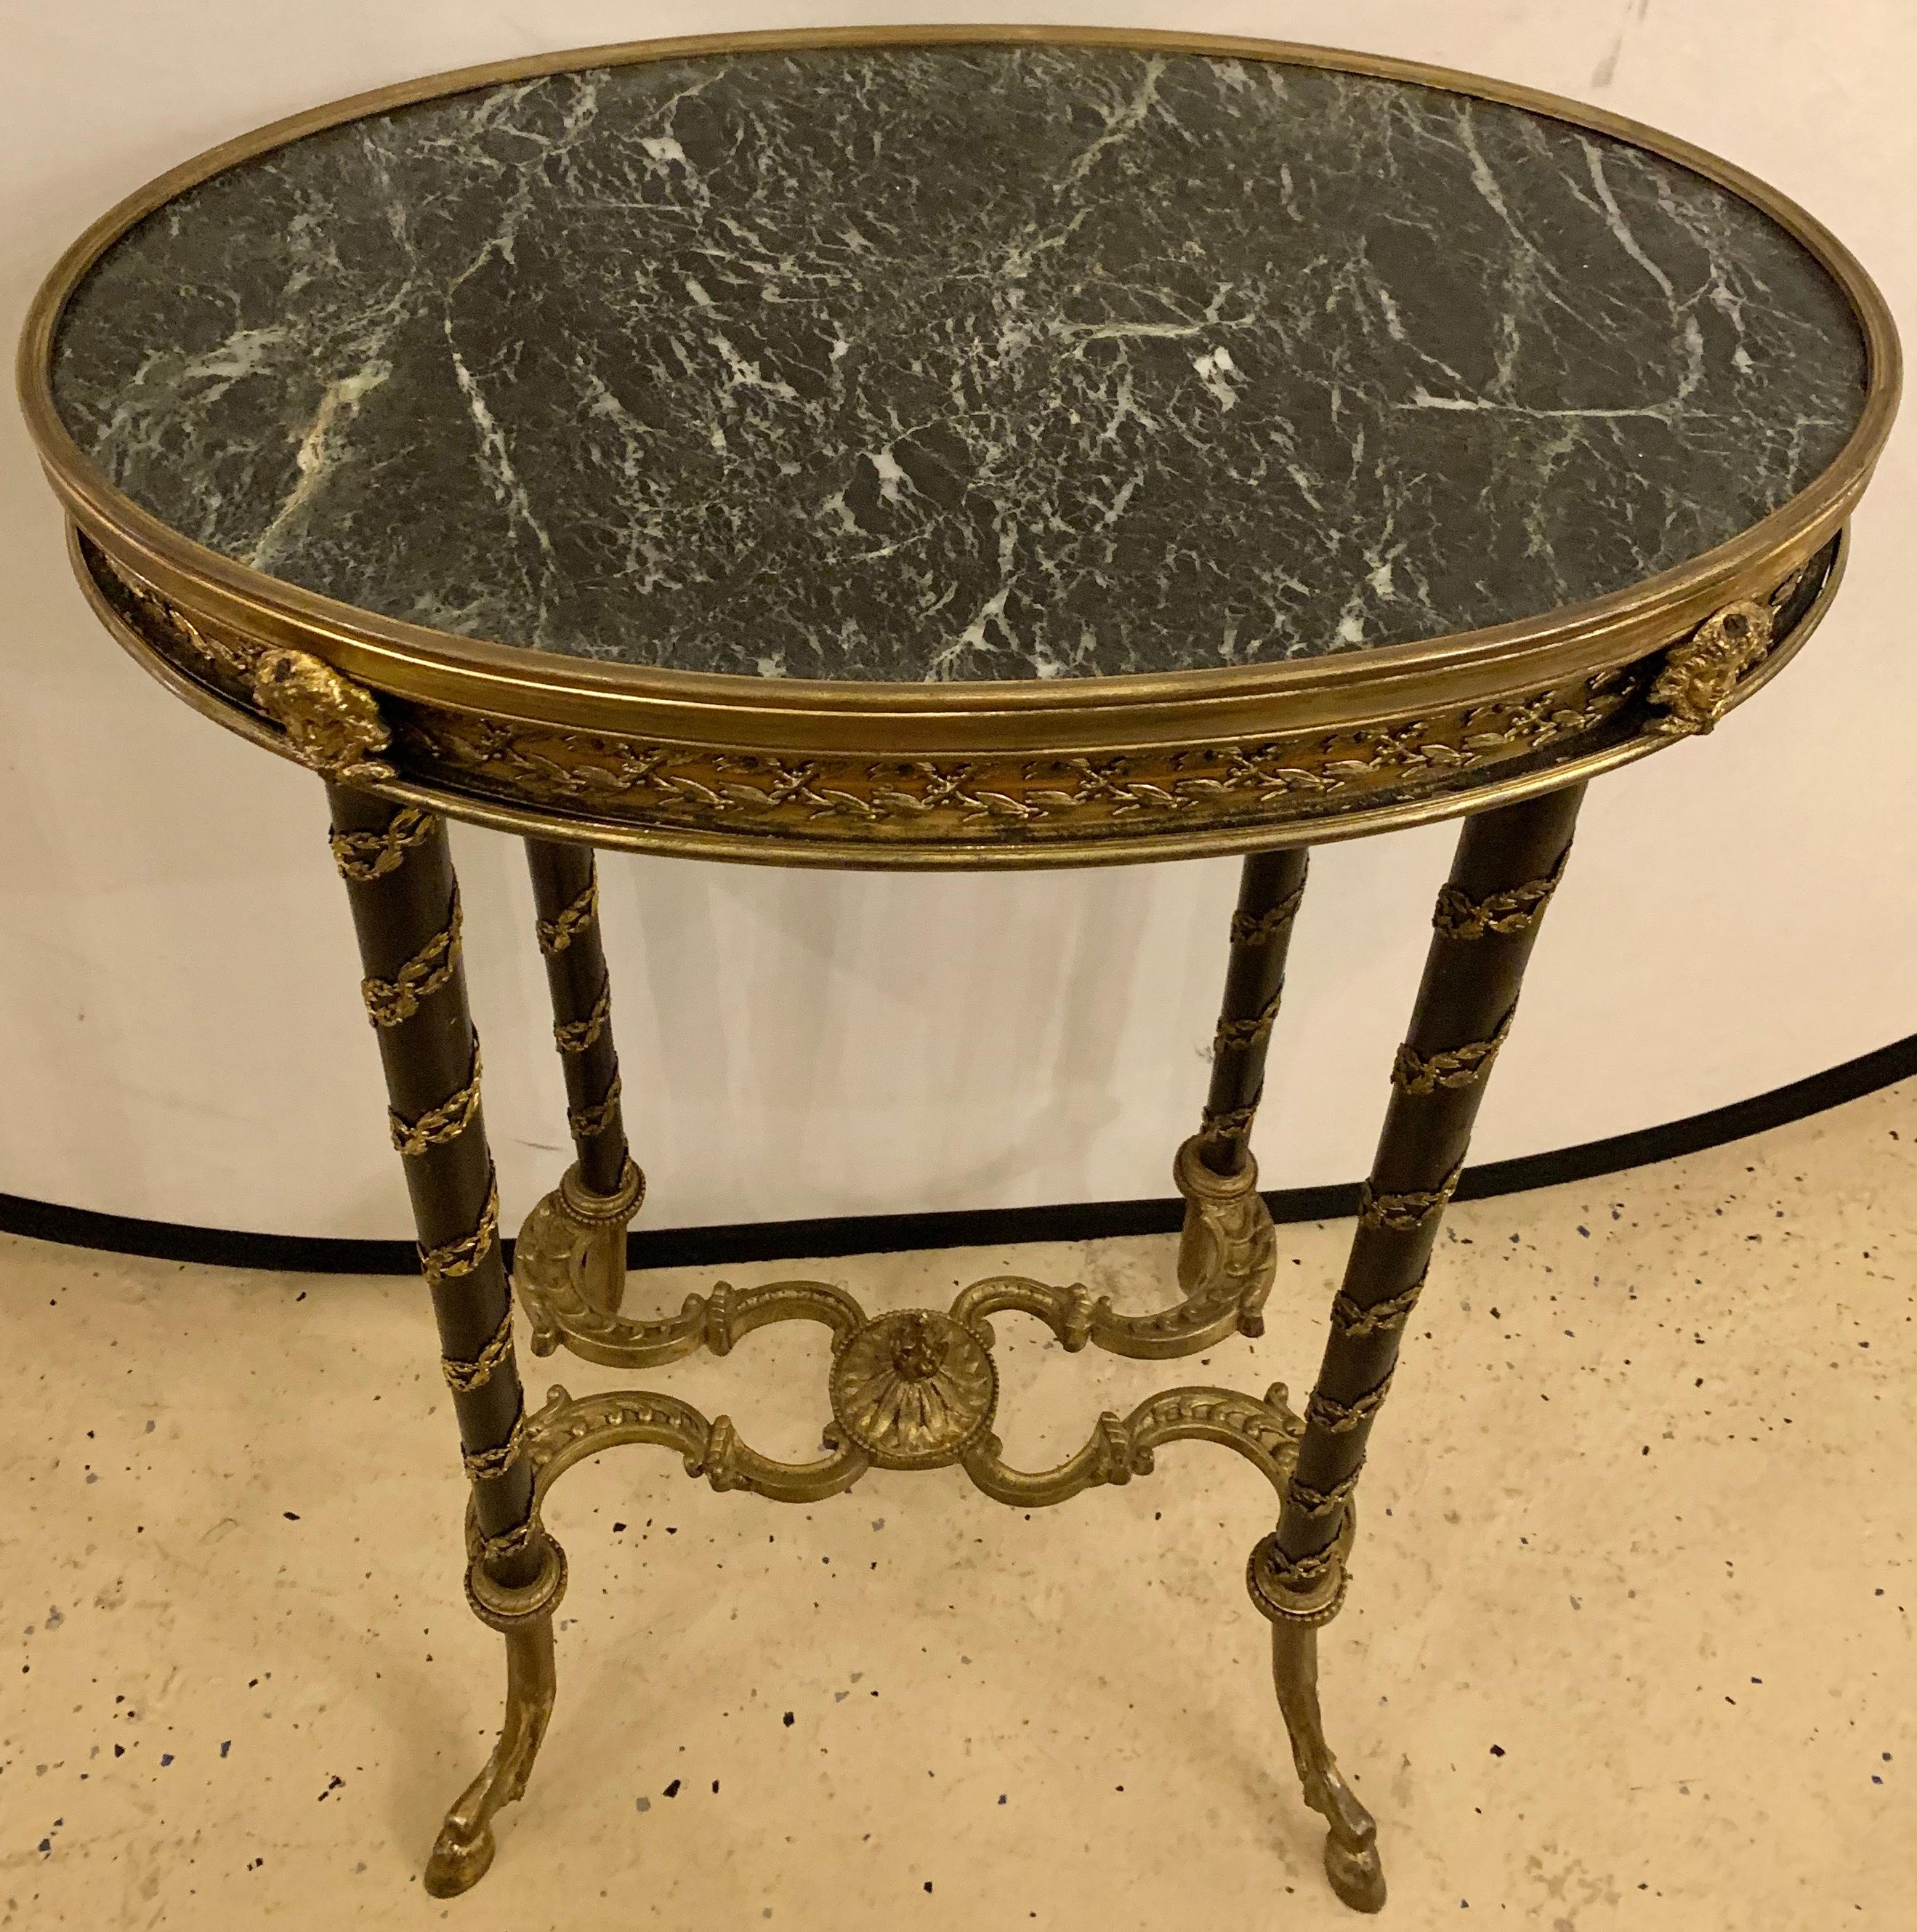 Marble-top oval French end Gueridon or Bouilliotte table finely bronze mounted

Greg
EXXX/ZZXA.